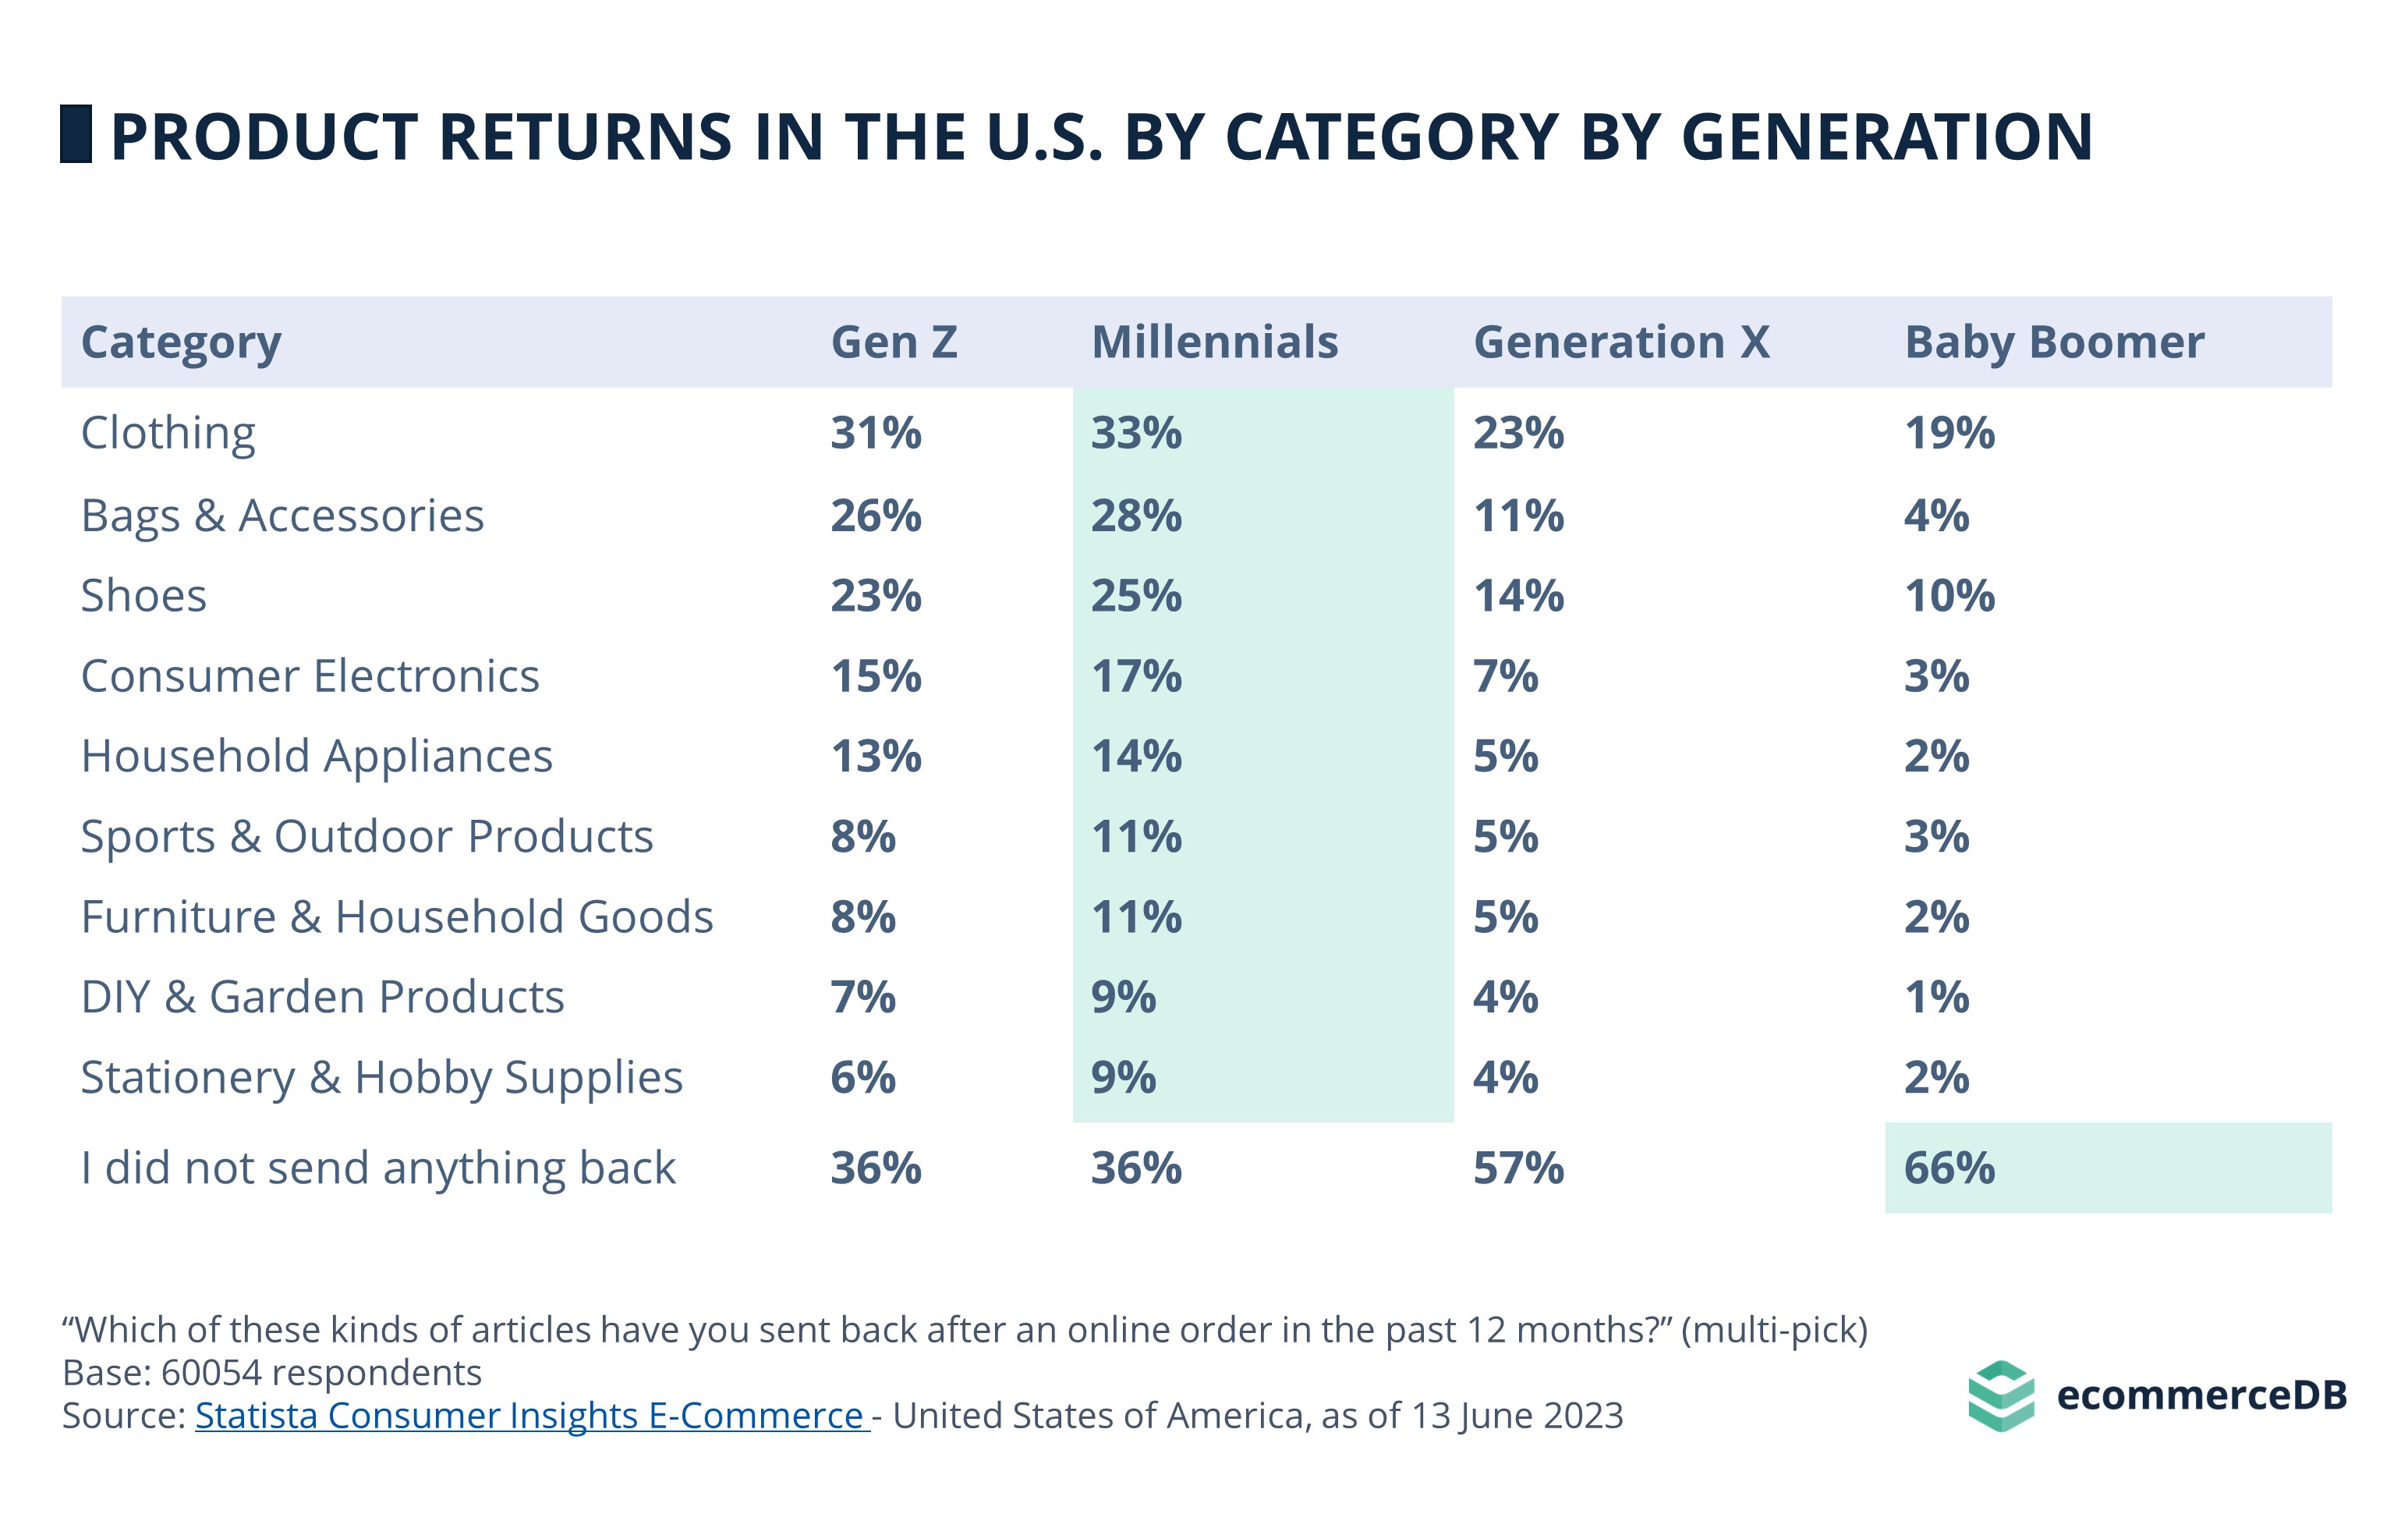 Product return rates in the U.S. according to Generation